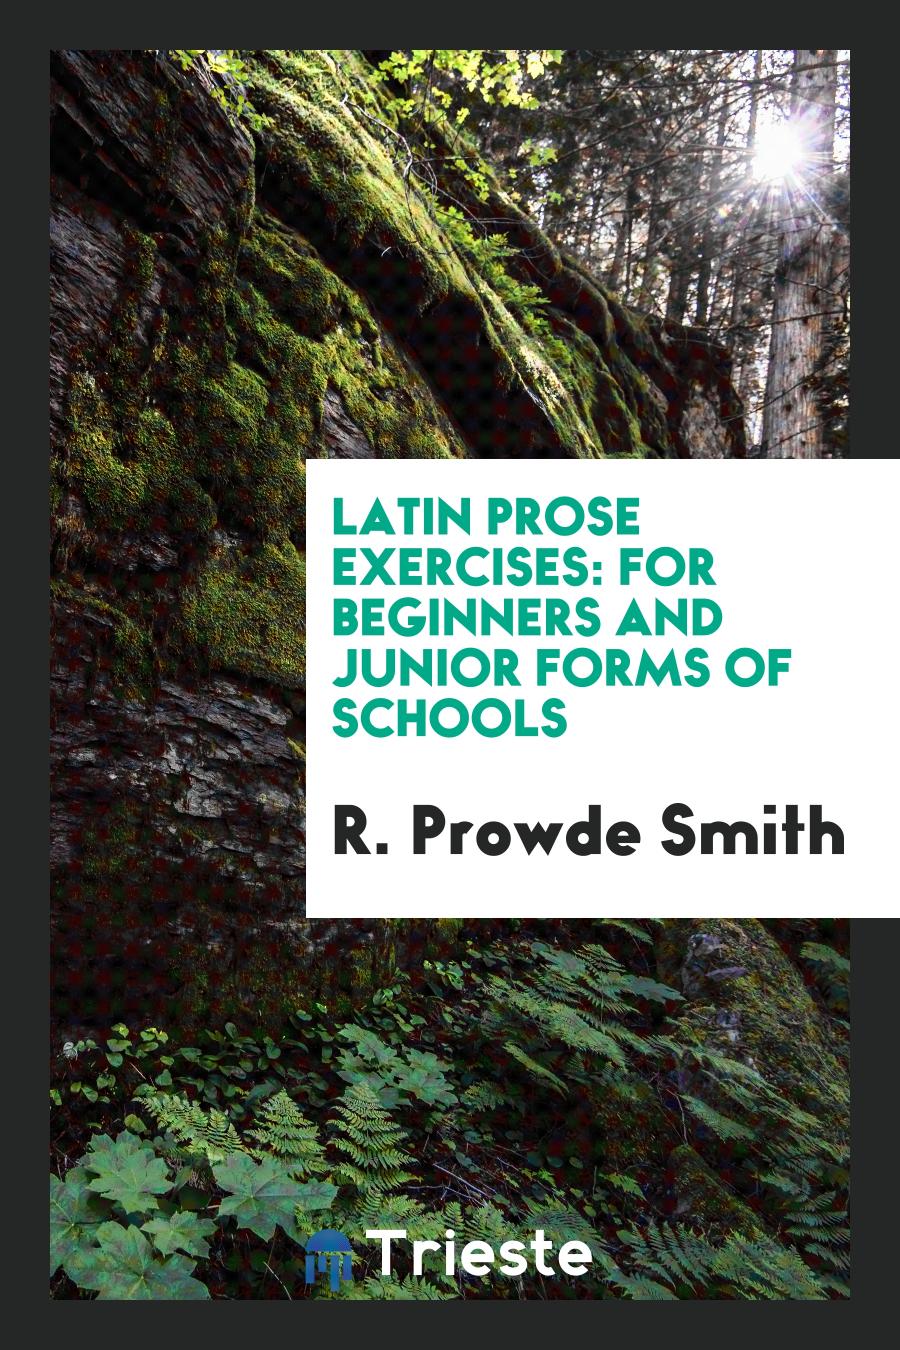 Latin Prose Exercises: For Beginners and Junior Forms of Schools